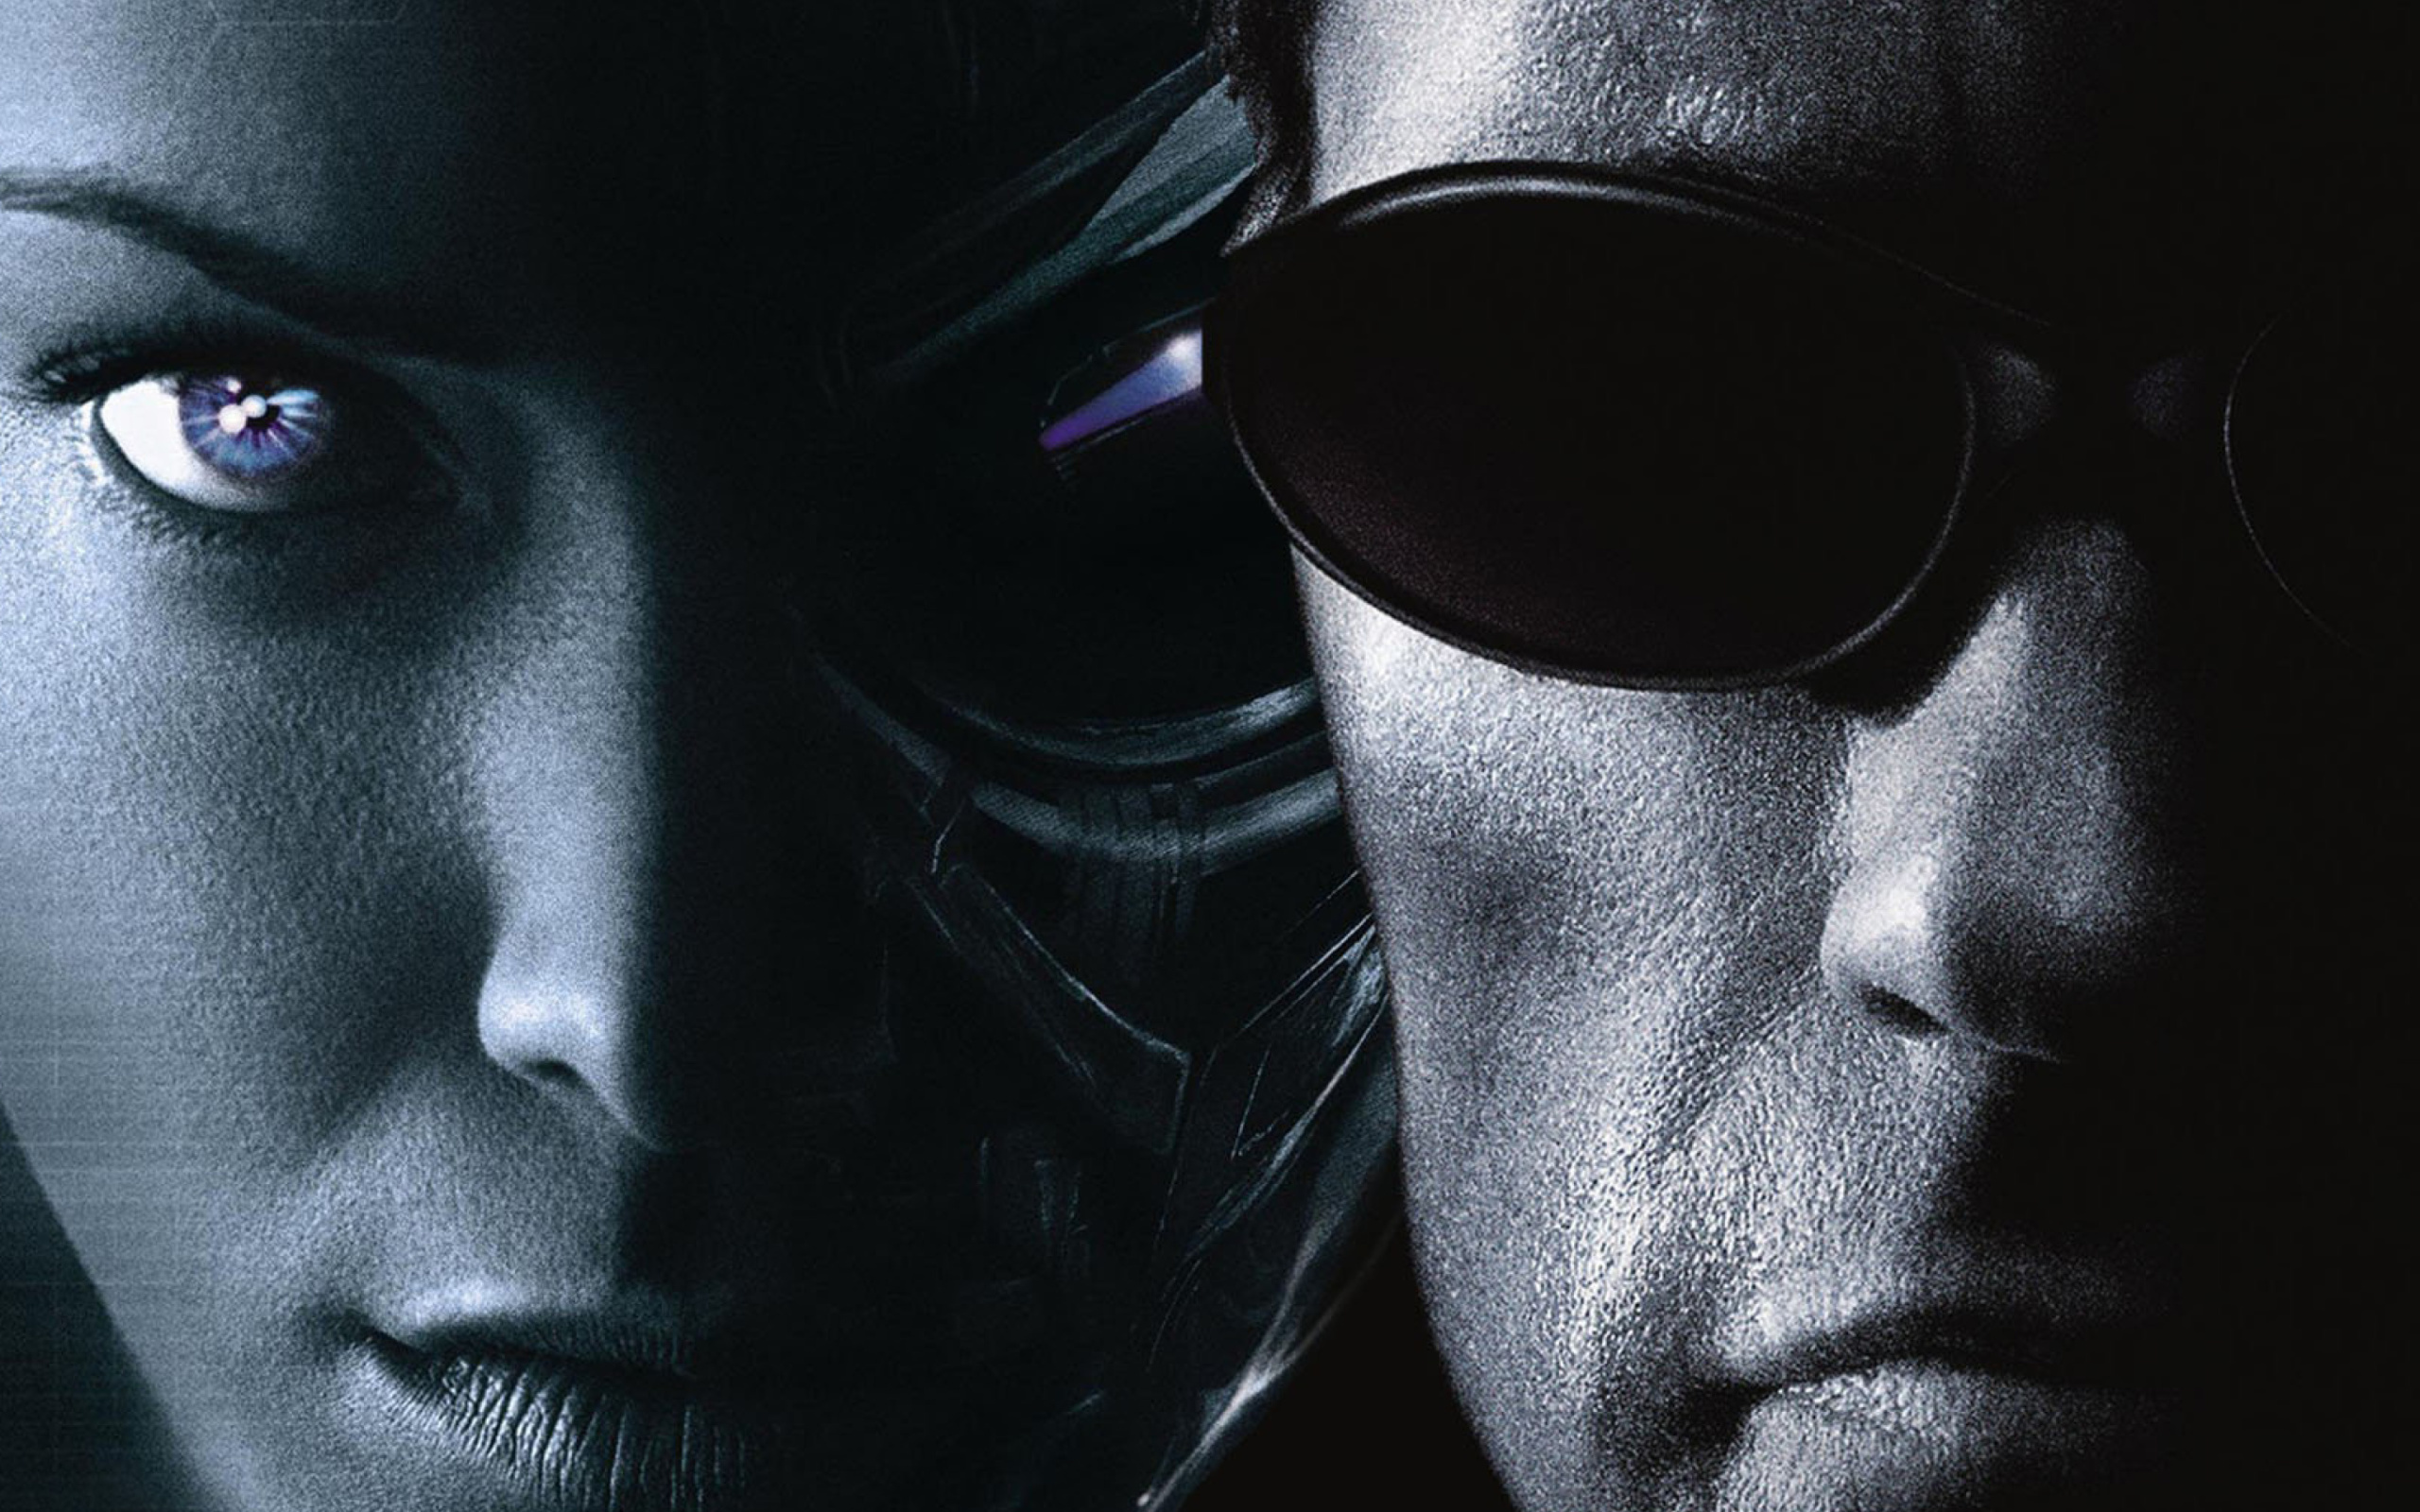 Terminator 3 wallpapers, Fan-posted images, Movie admiration, Powerful machine threats, 2560x1600 HD Desktop